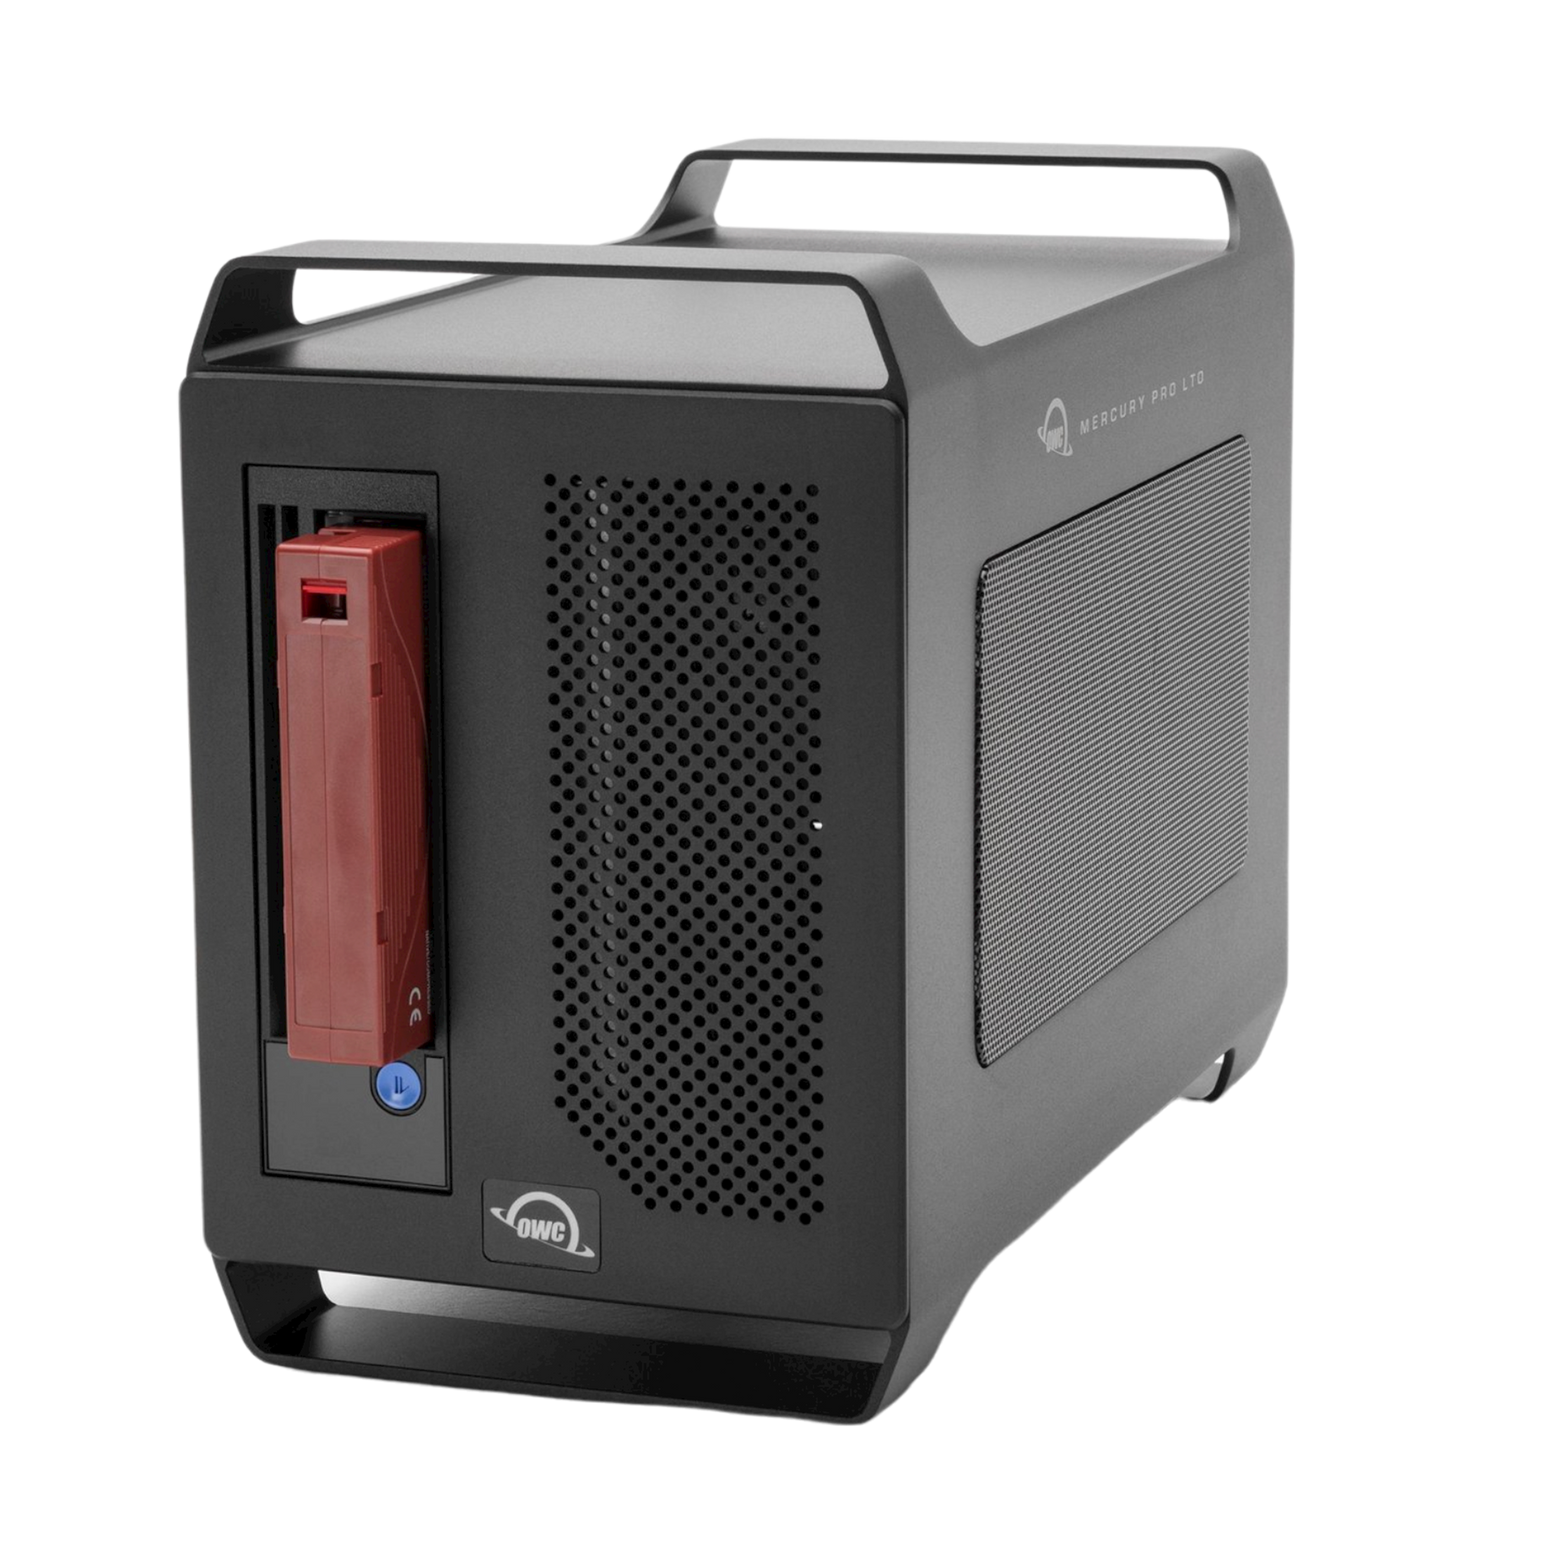 OWC Mercury Pro LTO Thunderbolt LTO-8 Tape Storage / Archiving Solution with 16TB Onboard SSD Storage and ArGest Backup Software